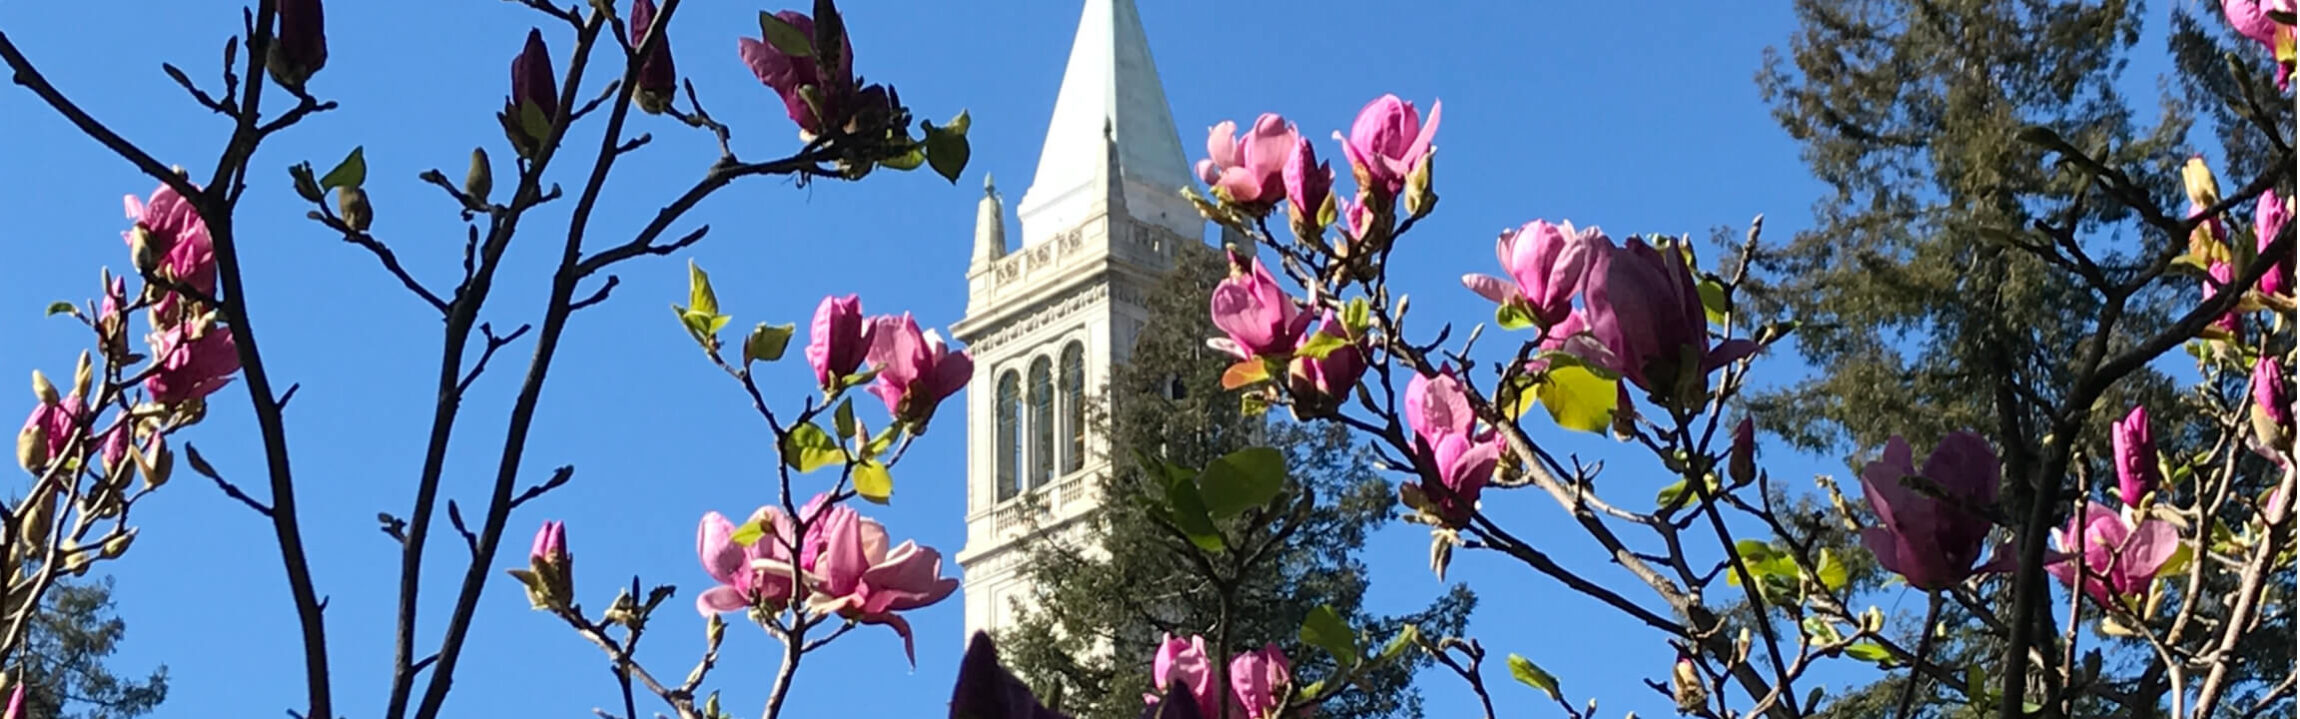 The Campanile at UC Berkeley, behind a flowering plant